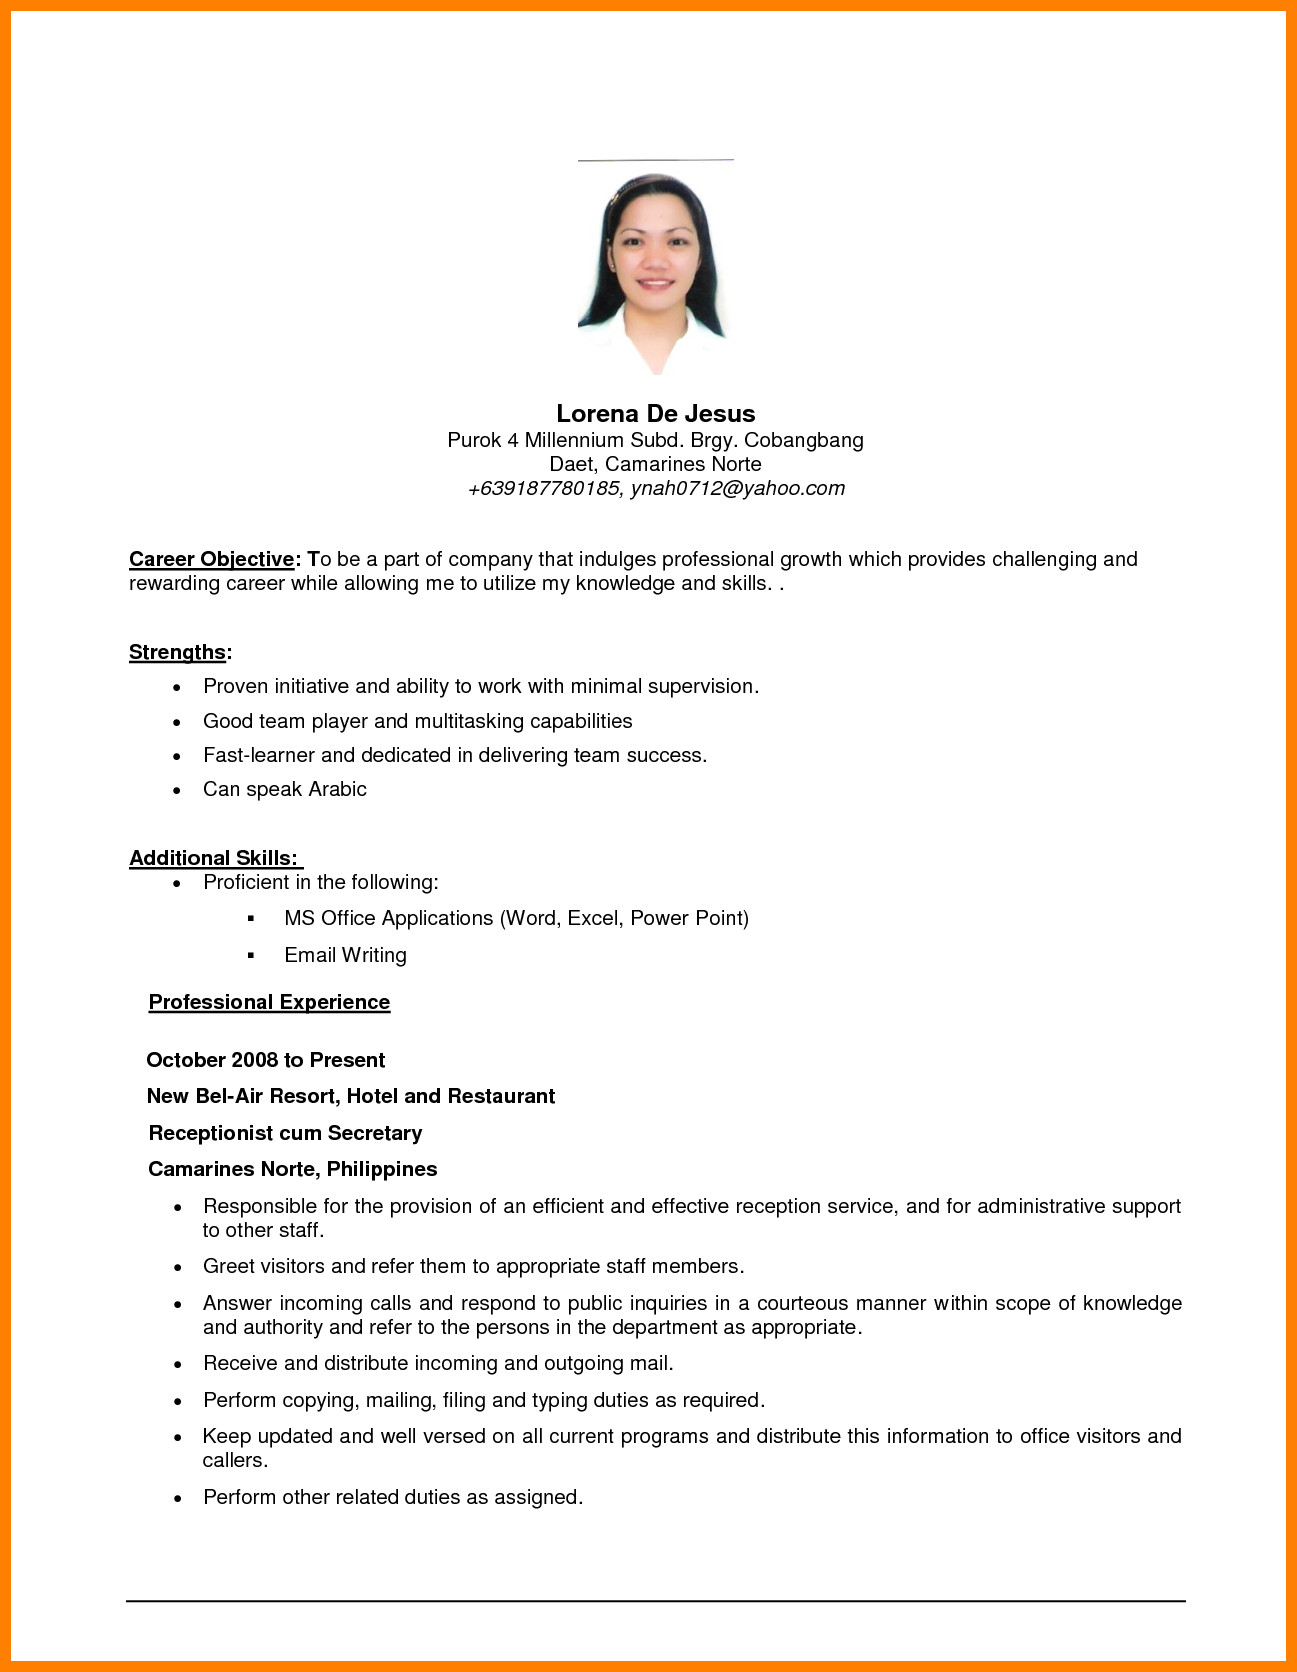 Sample Job Objectives for A Resume Resume Objective Sample Puter Skills Examples for